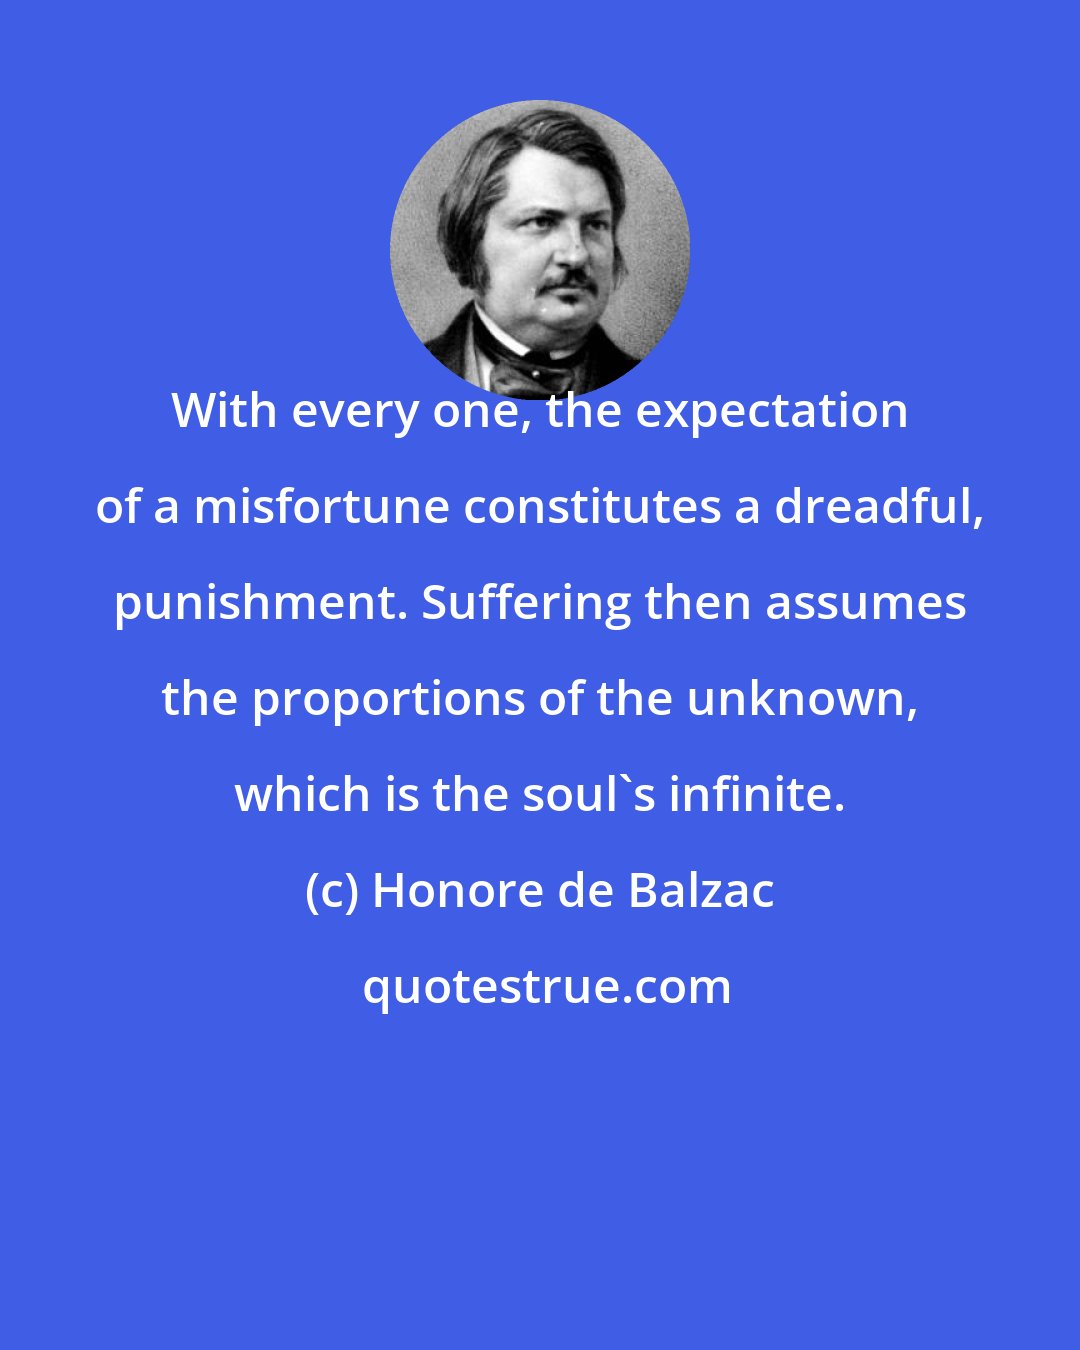 Honore de Balzac: With every one, the expectation of a misfortune constitutes a dreadful, punishment. Suffering then assumes the proportions of the unknown, which is the soul's infinite.